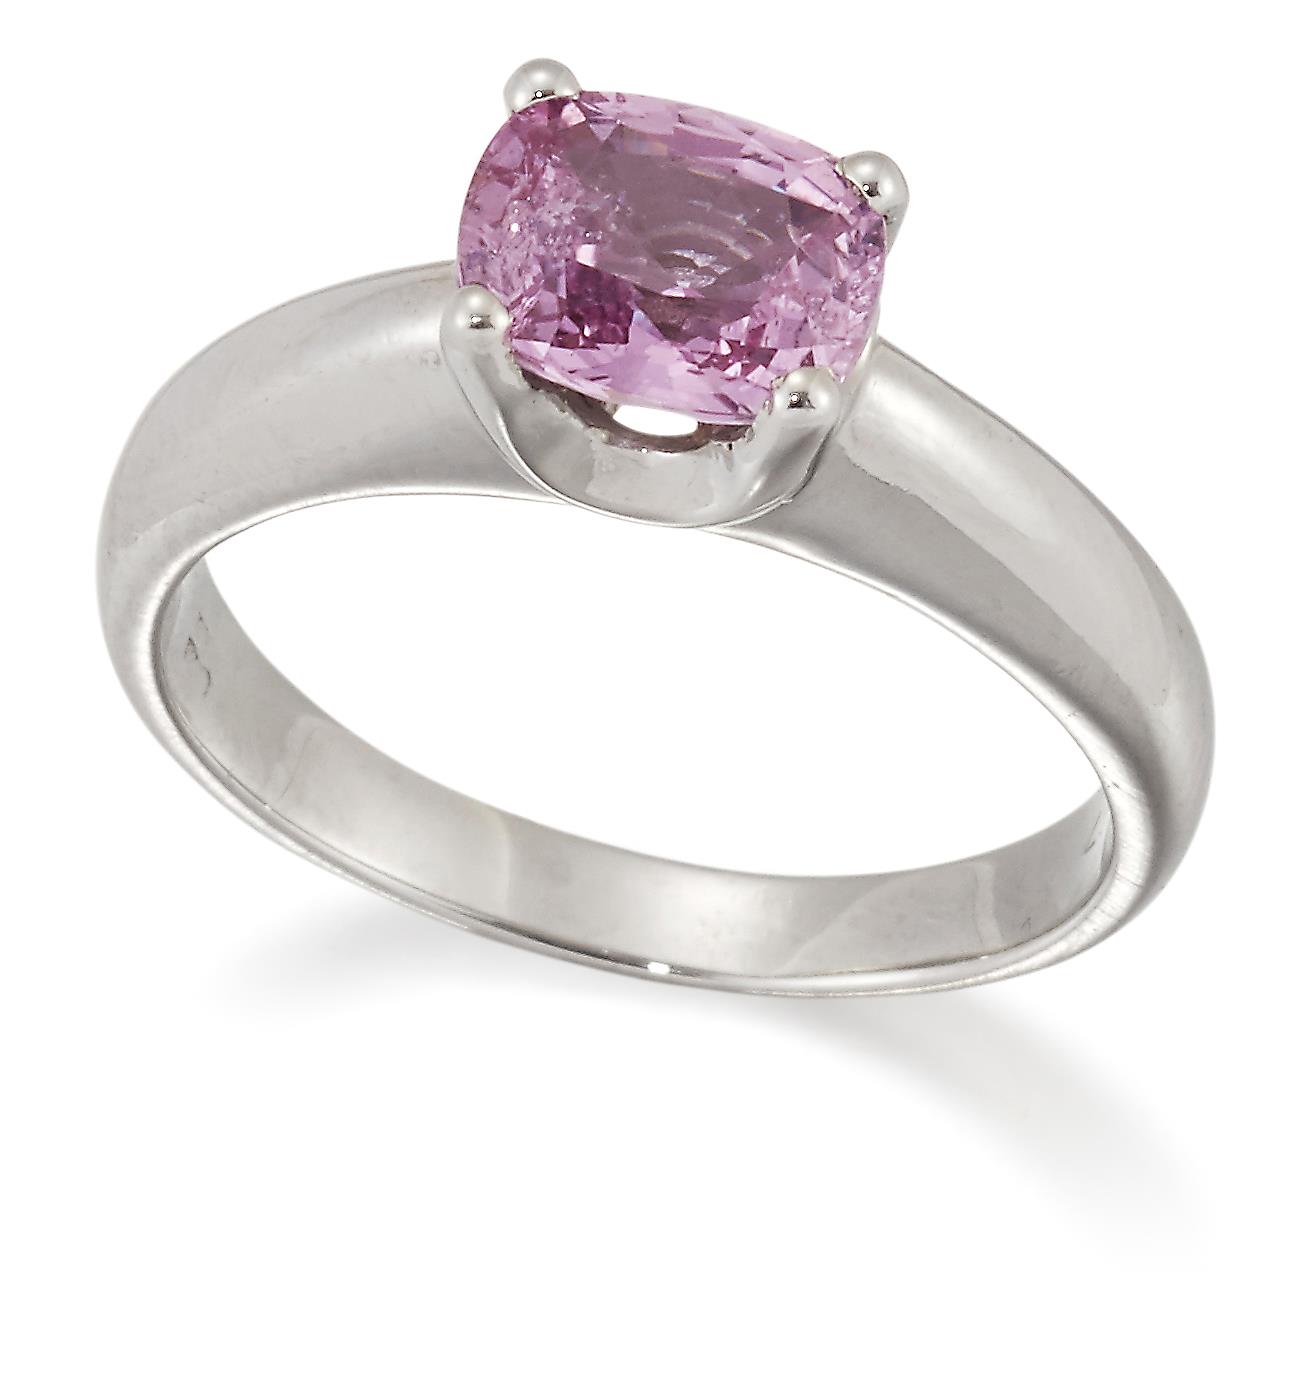 A PINK SAPPHIRE RING